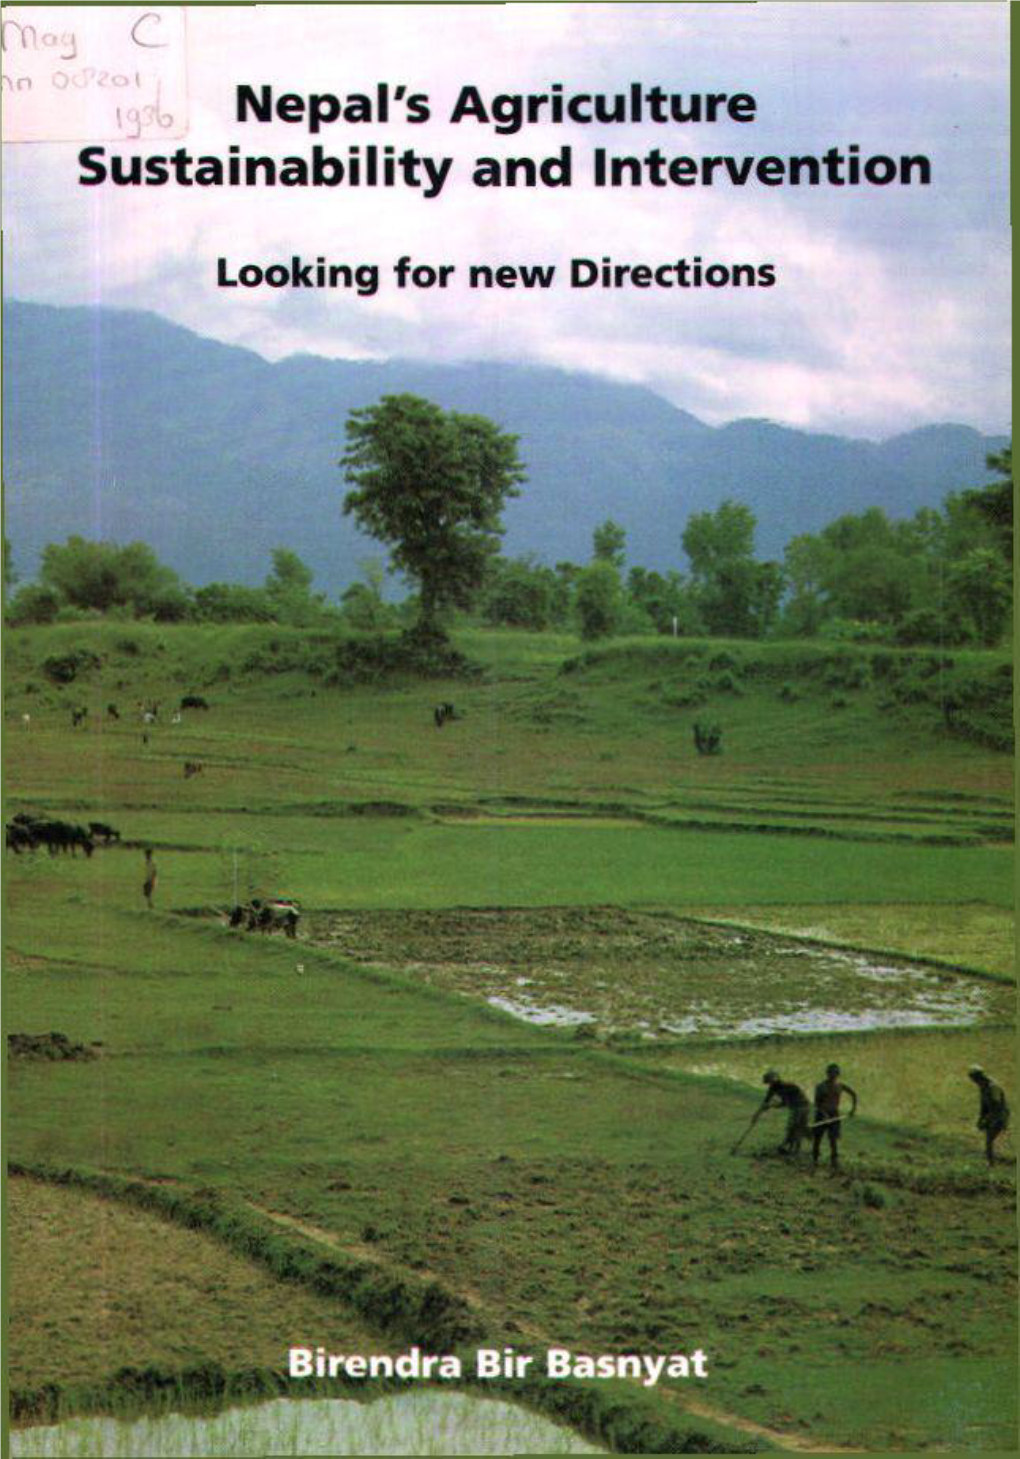 Nepal's Agriculture Sustainability and Intervention